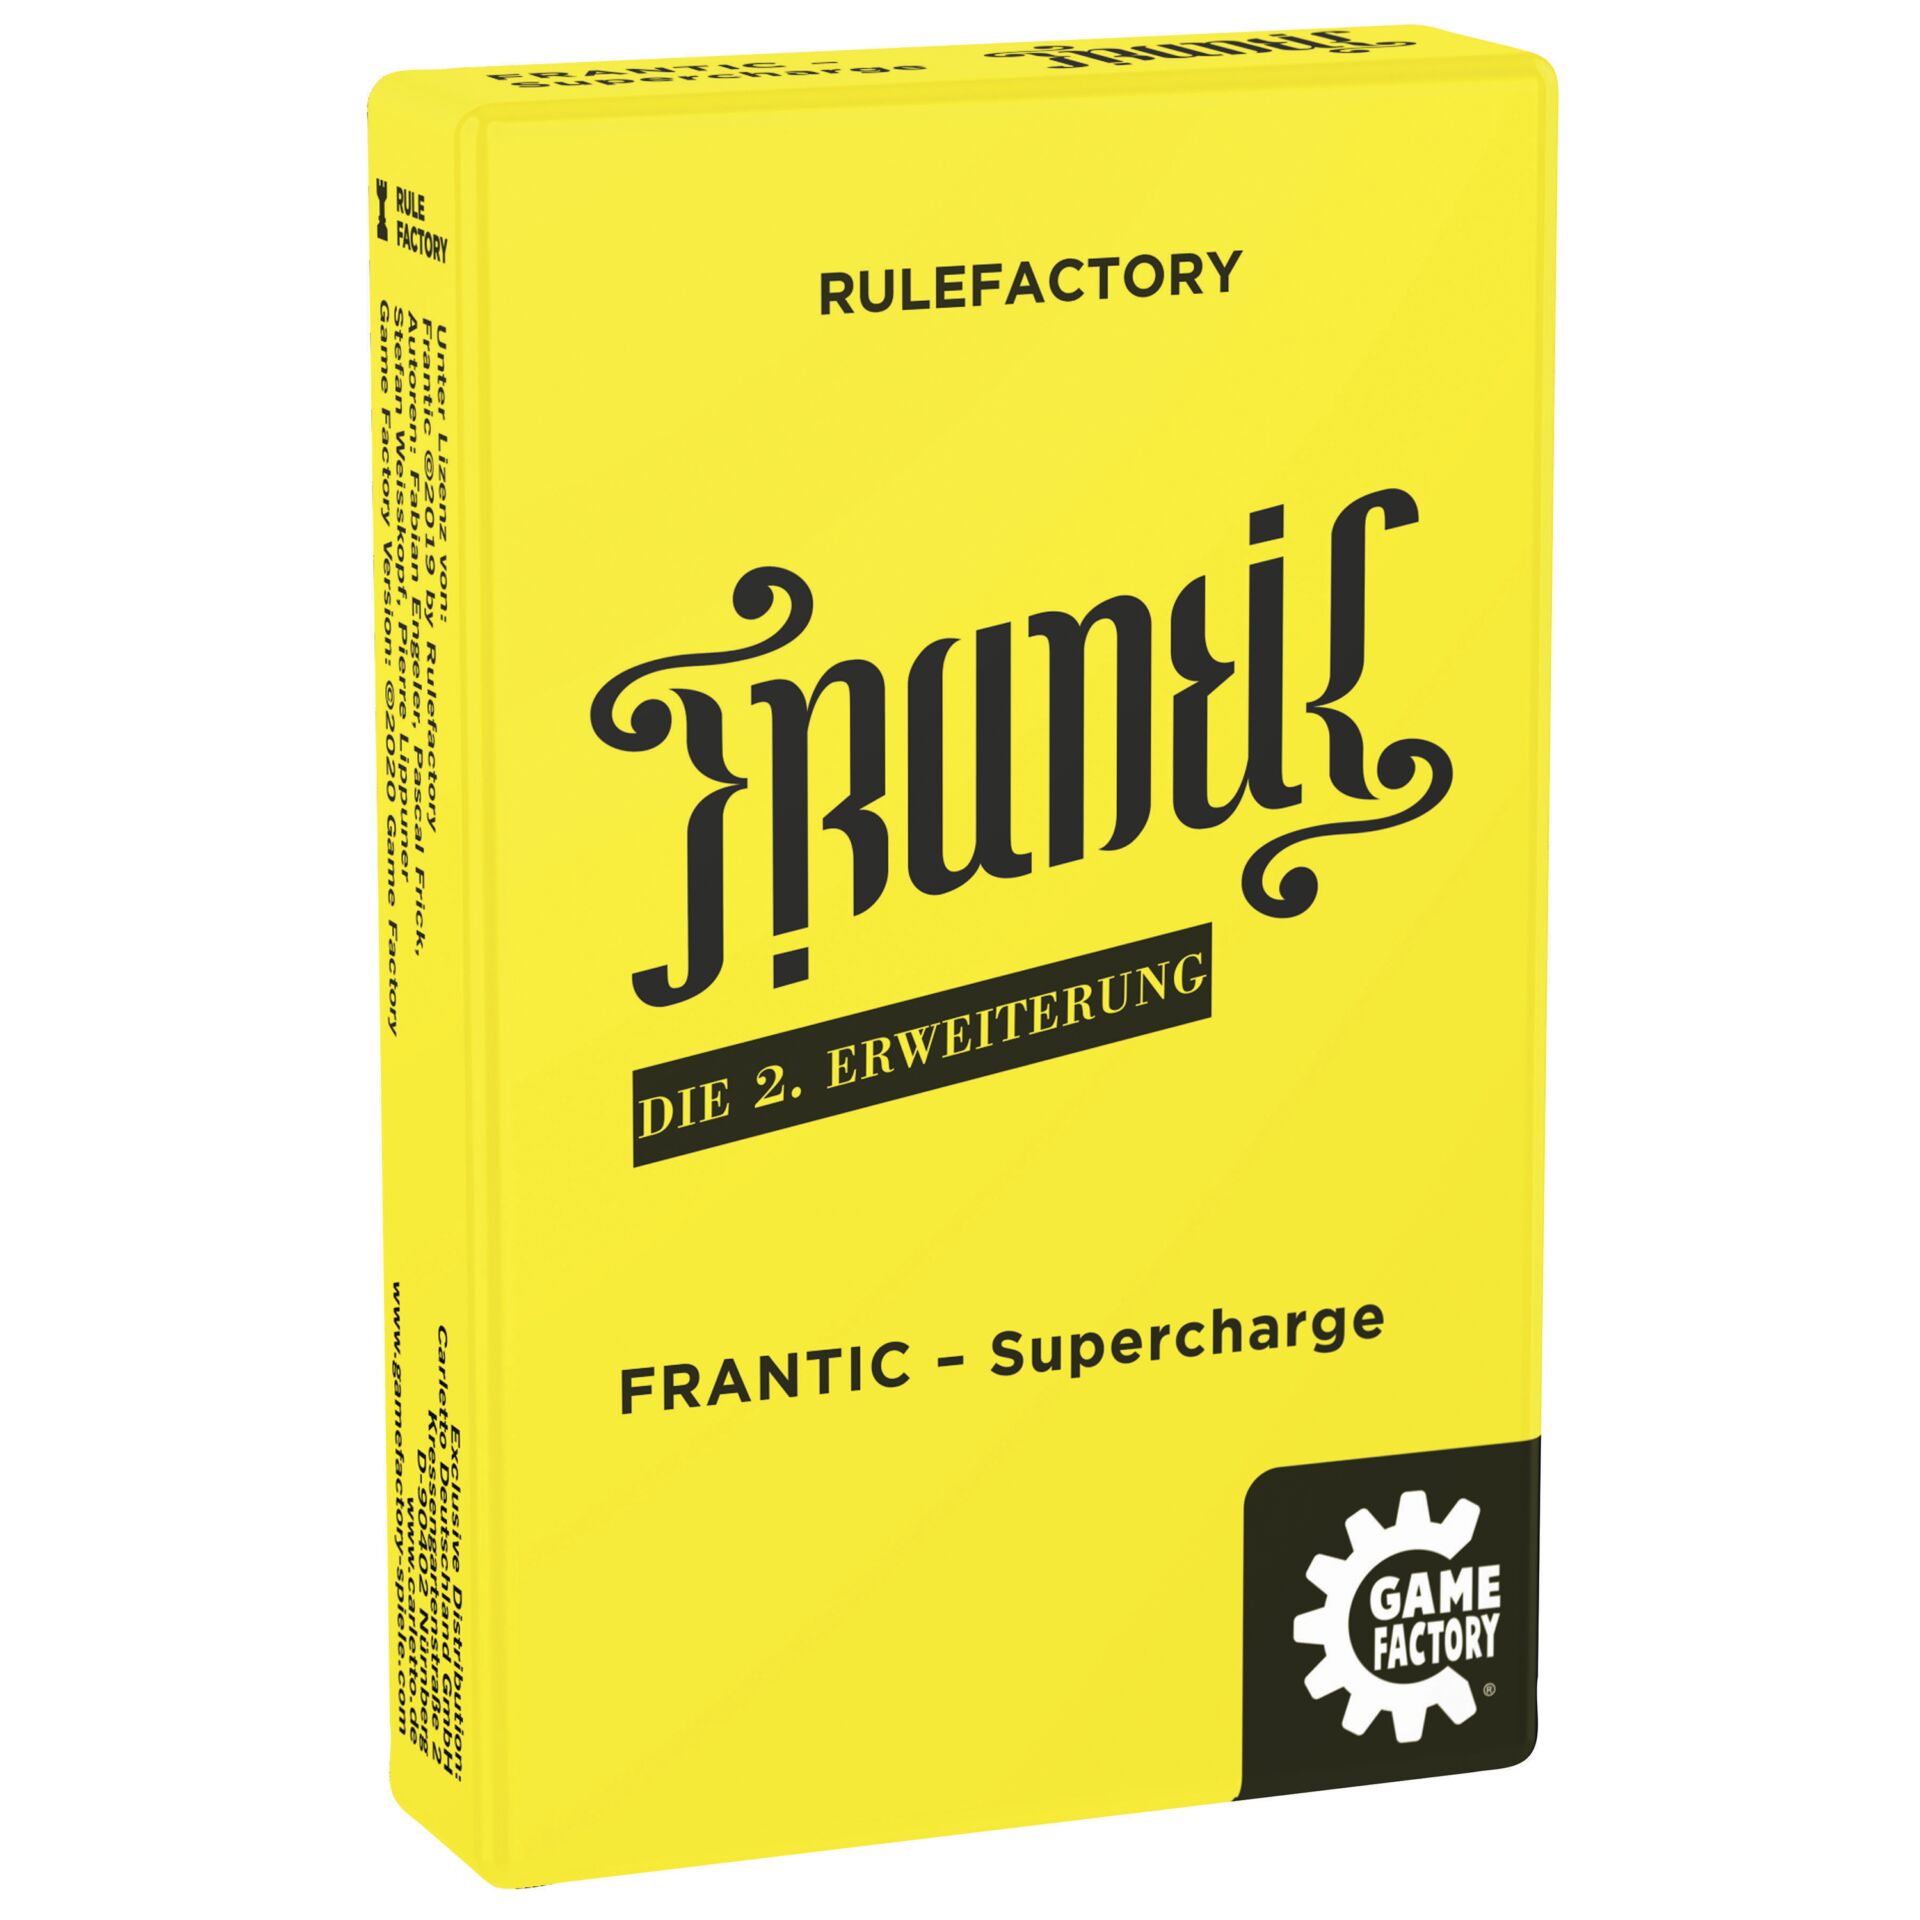 Game Factory FRANTIC Supercharge (d) 823559_00